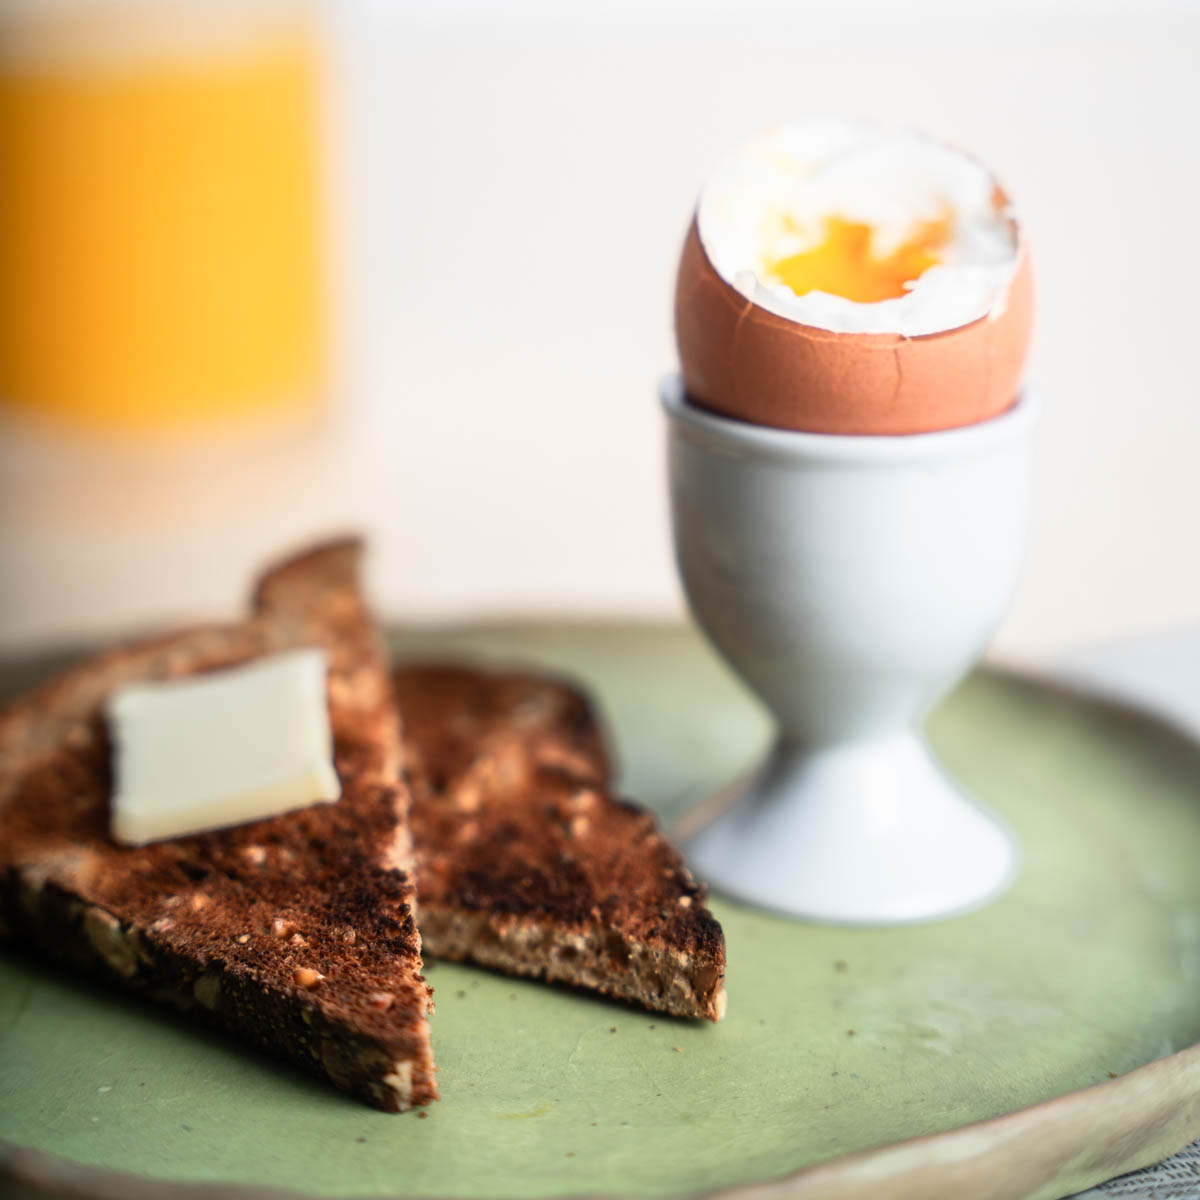 Soft cooked egg in a egg holder with toast on a sage green plate, and orange juice in the background.